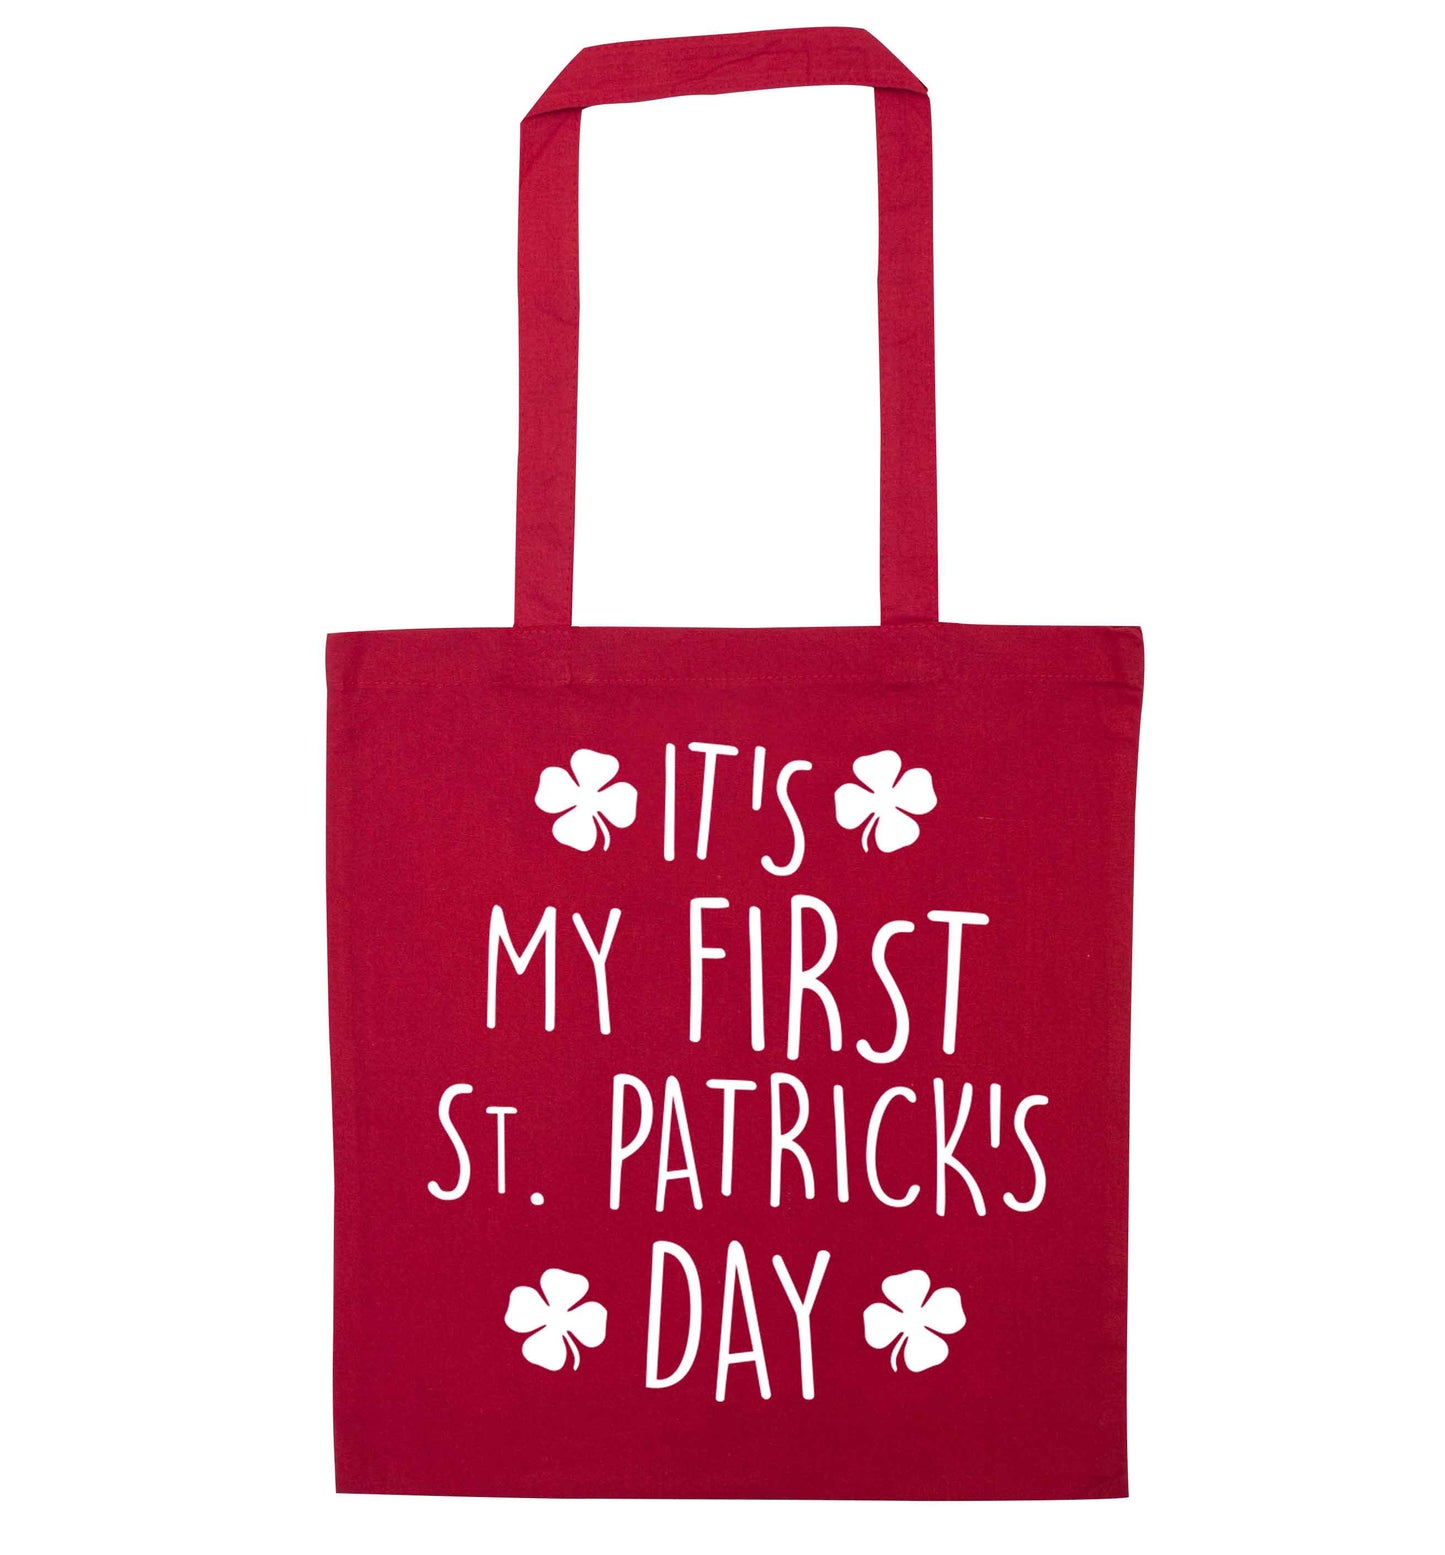 It's my first St.Patrick's day red tote bag